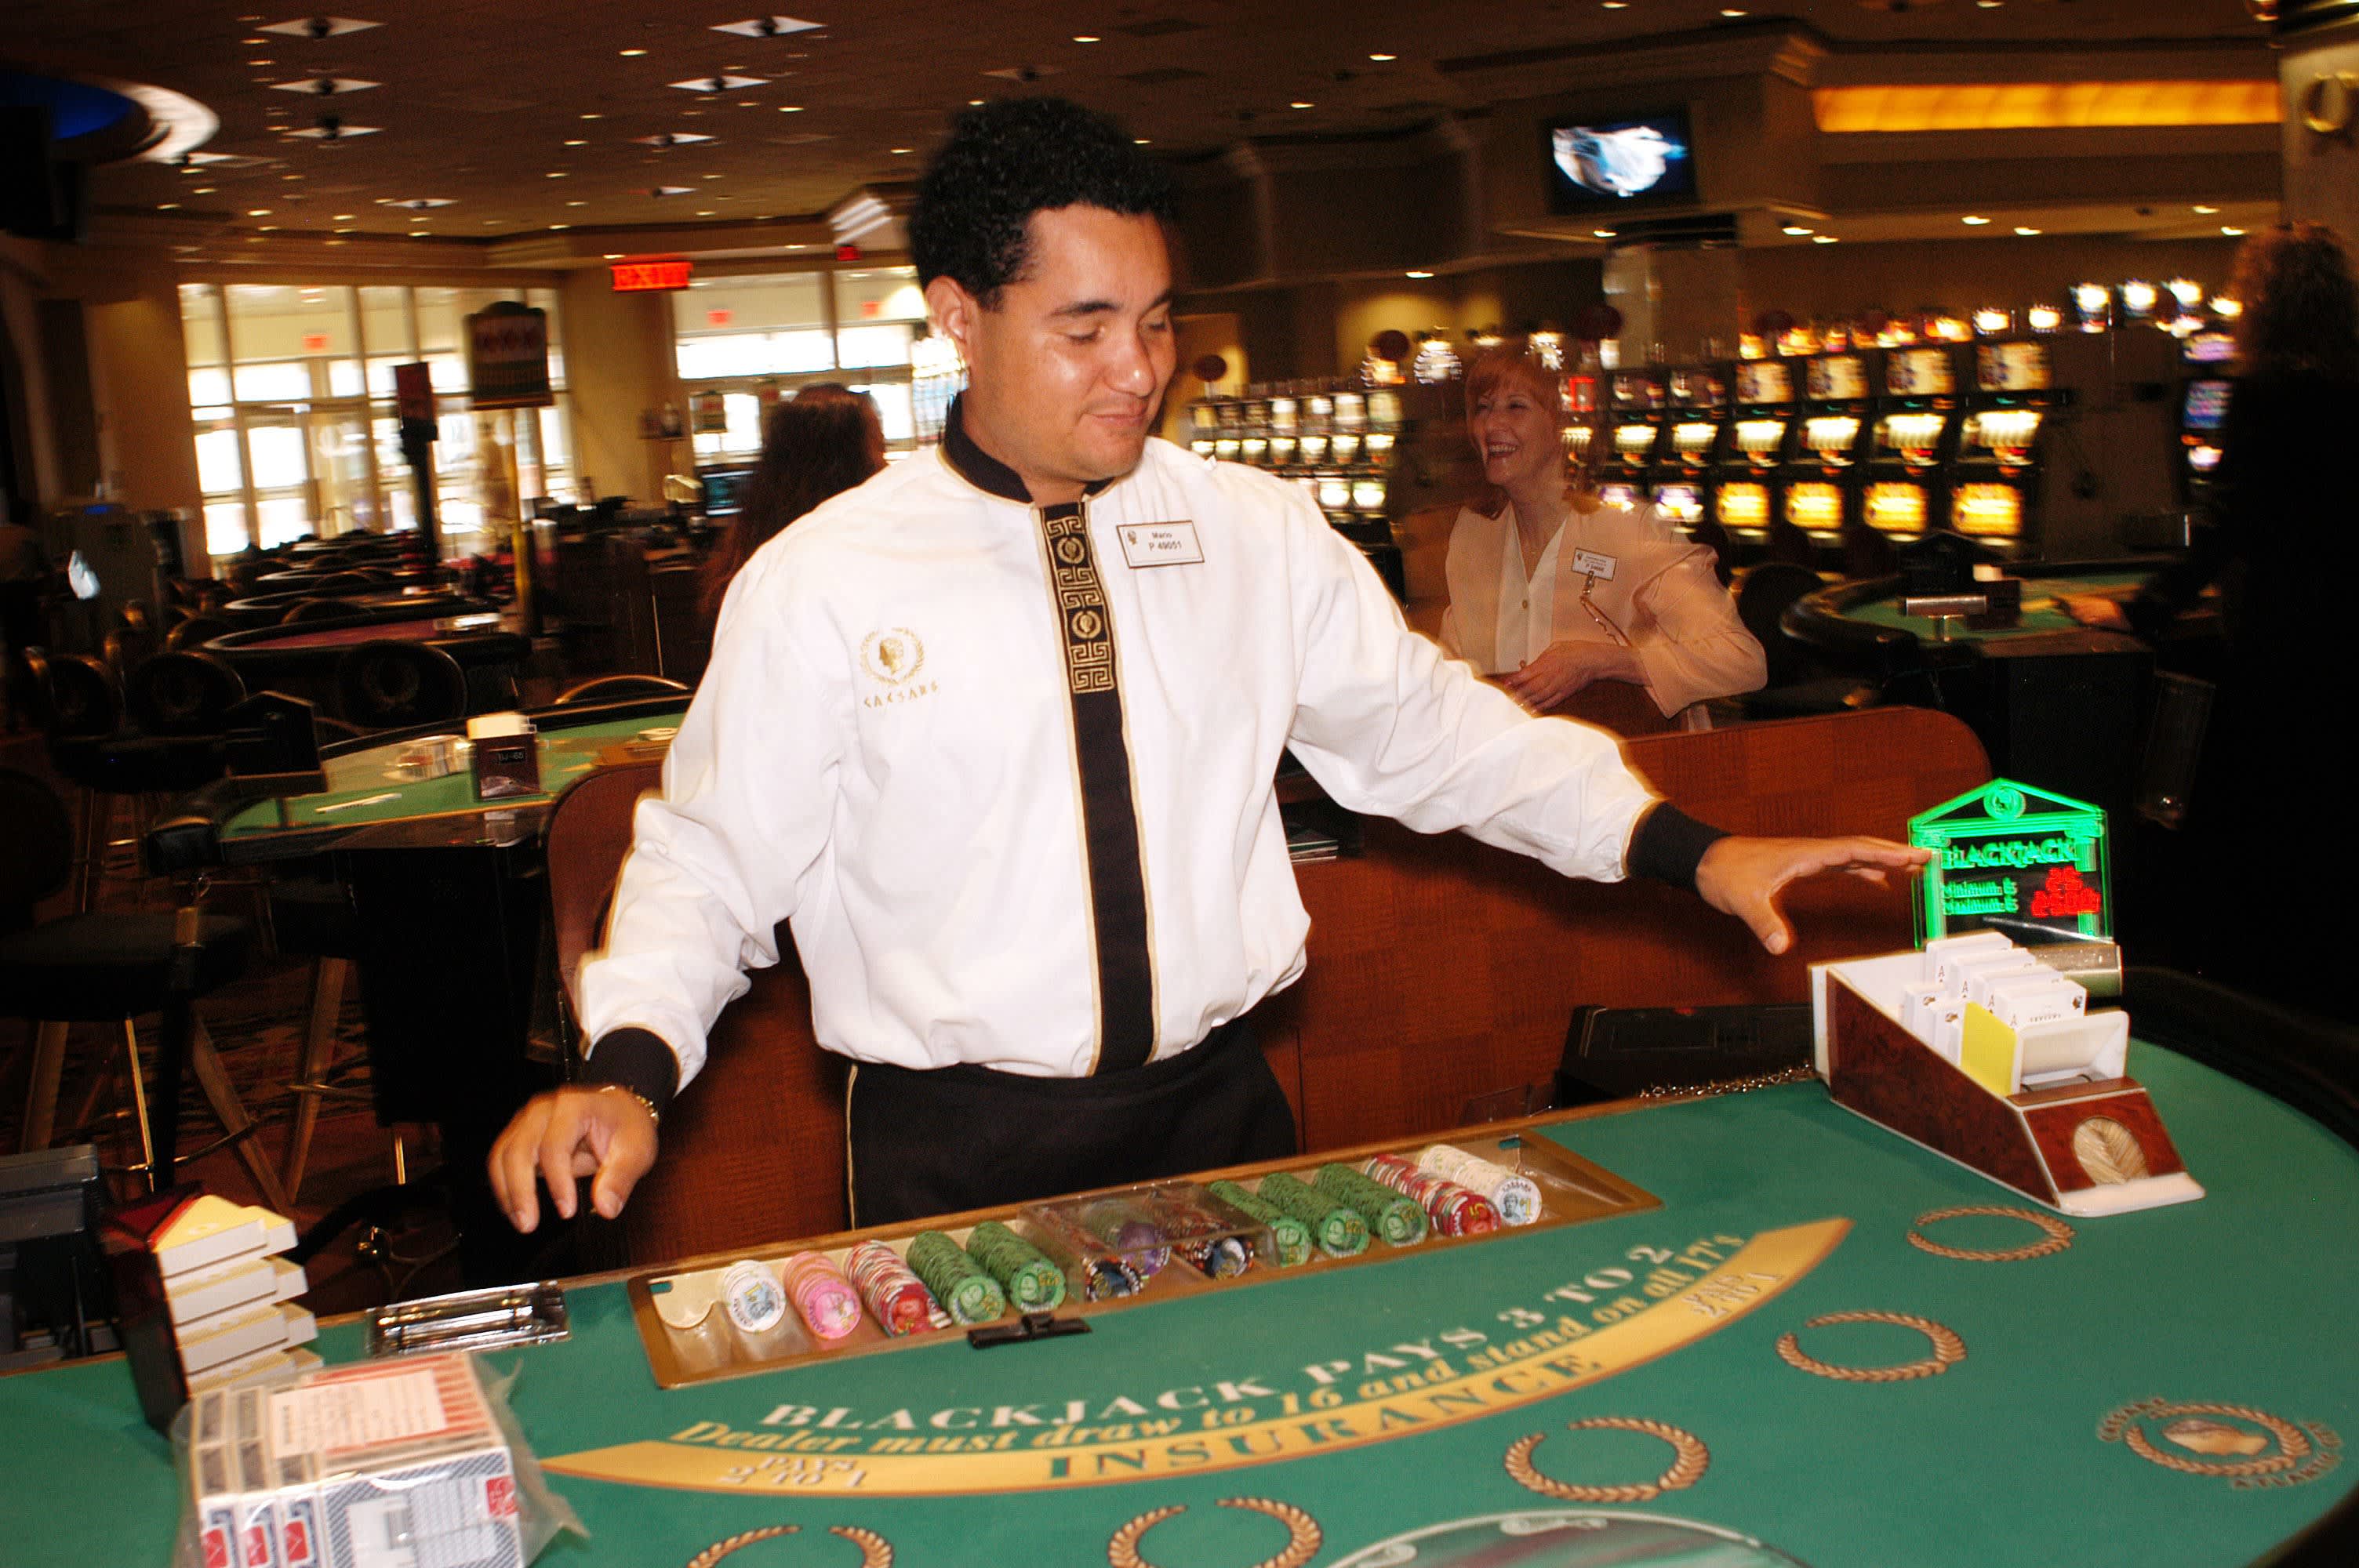 Casino industry in US has new rules for responsible gambling